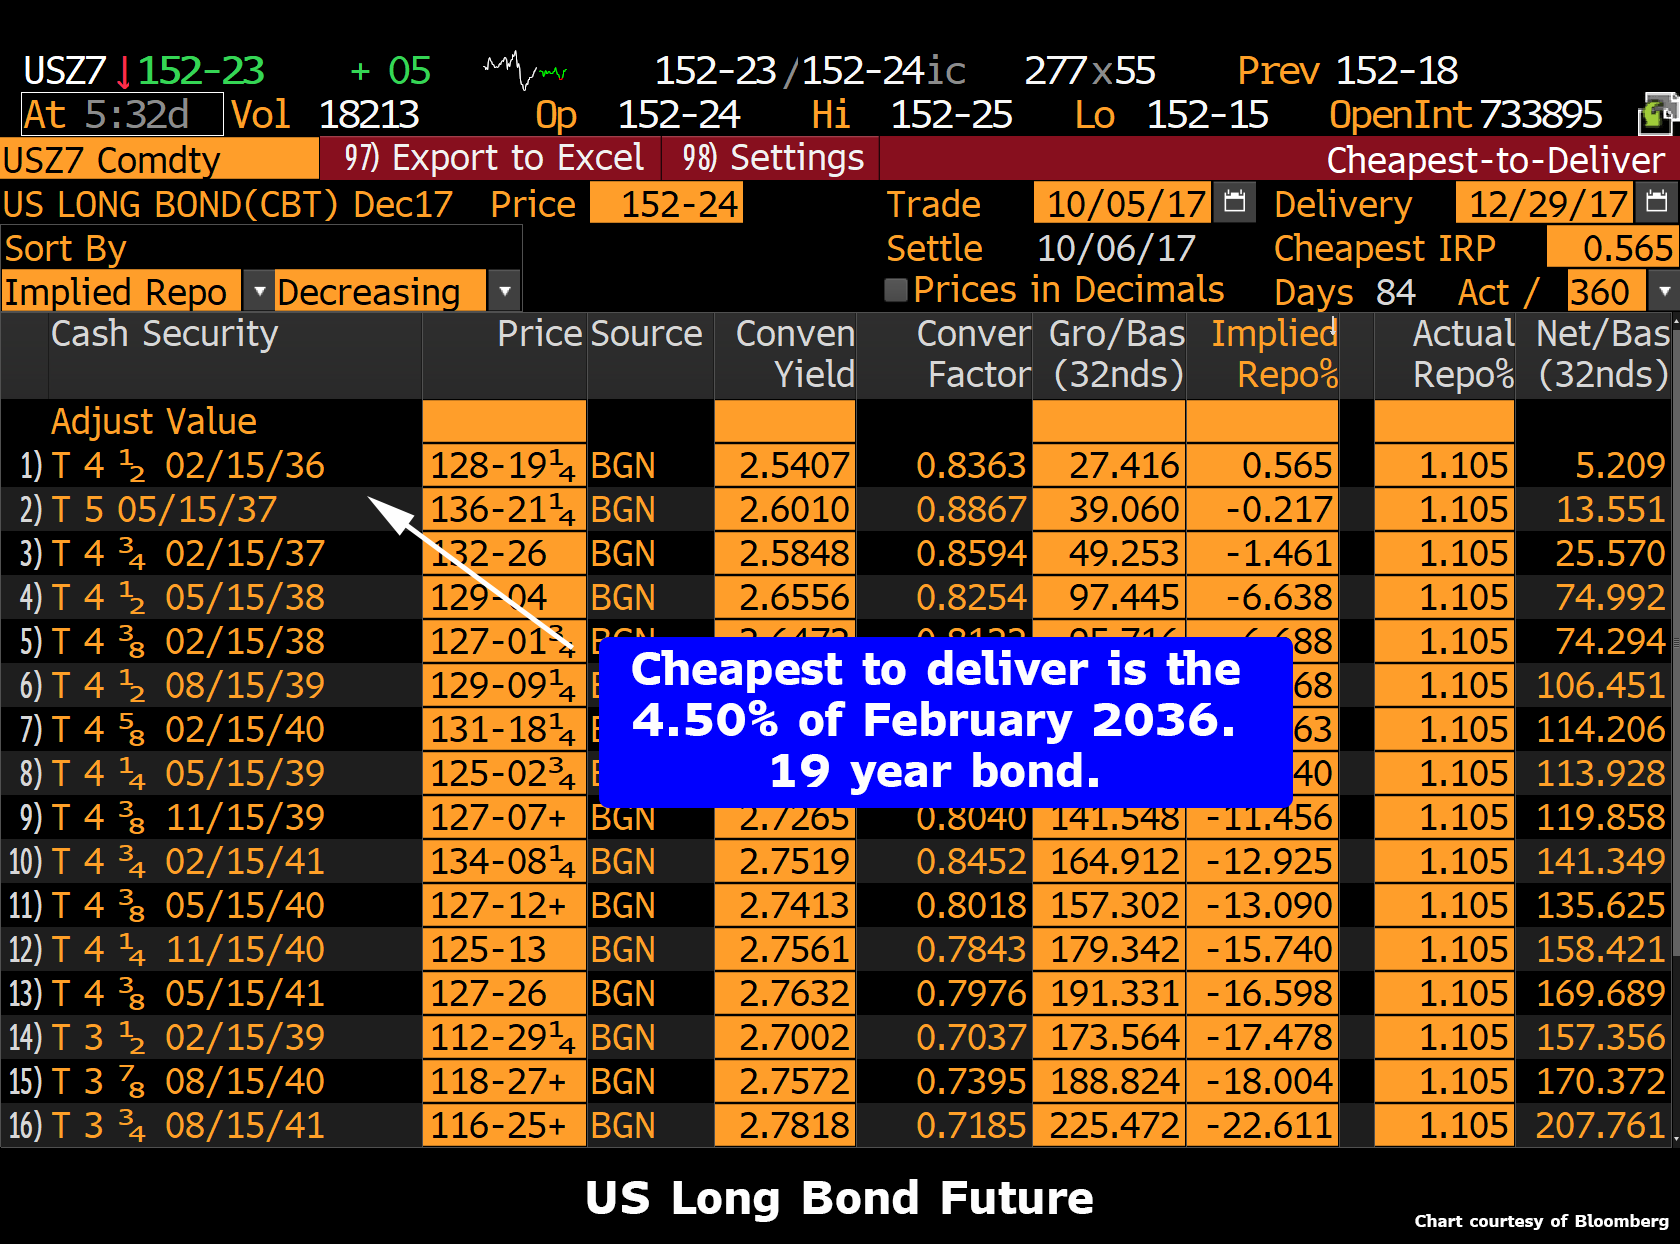 Is This The Best Way To Bet On The Fed Losing Control Of The Bond Market?